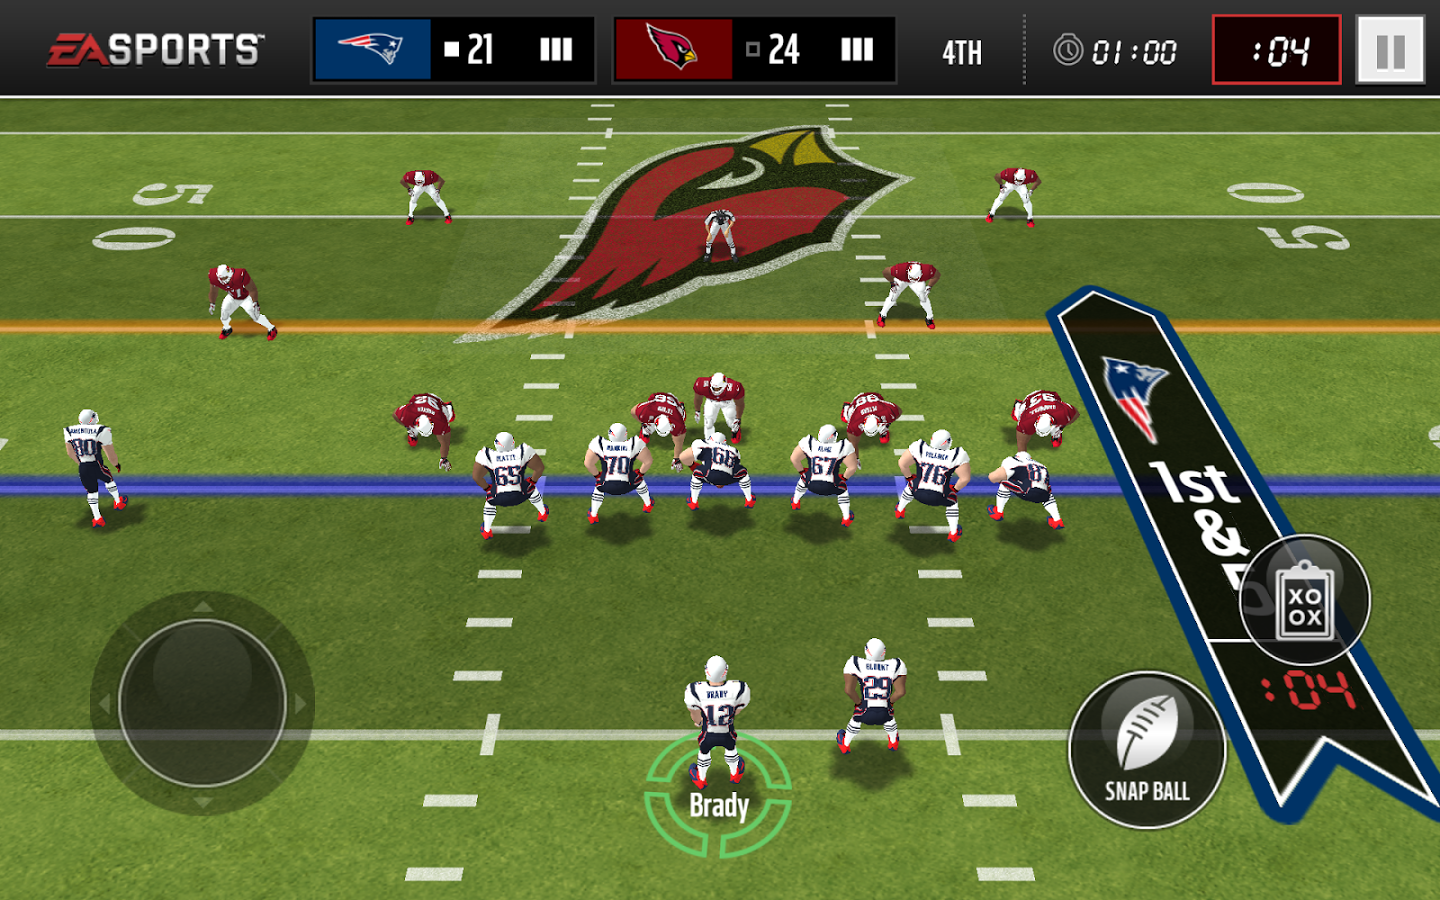 Recommended Football Games for Android and iOS